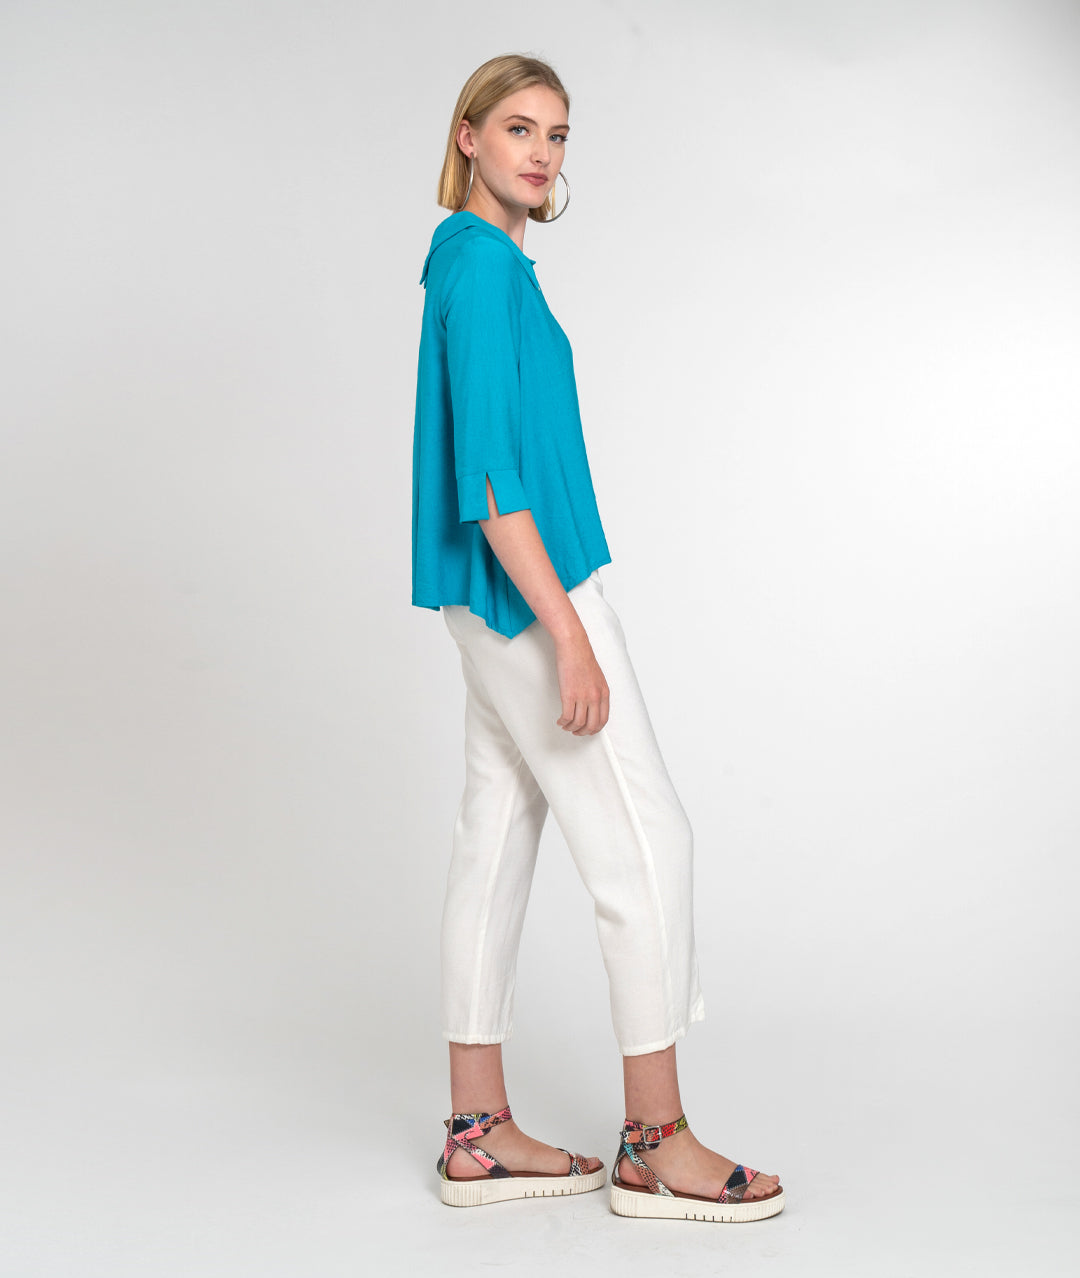 model in a slim white pant with a teal button down blouse